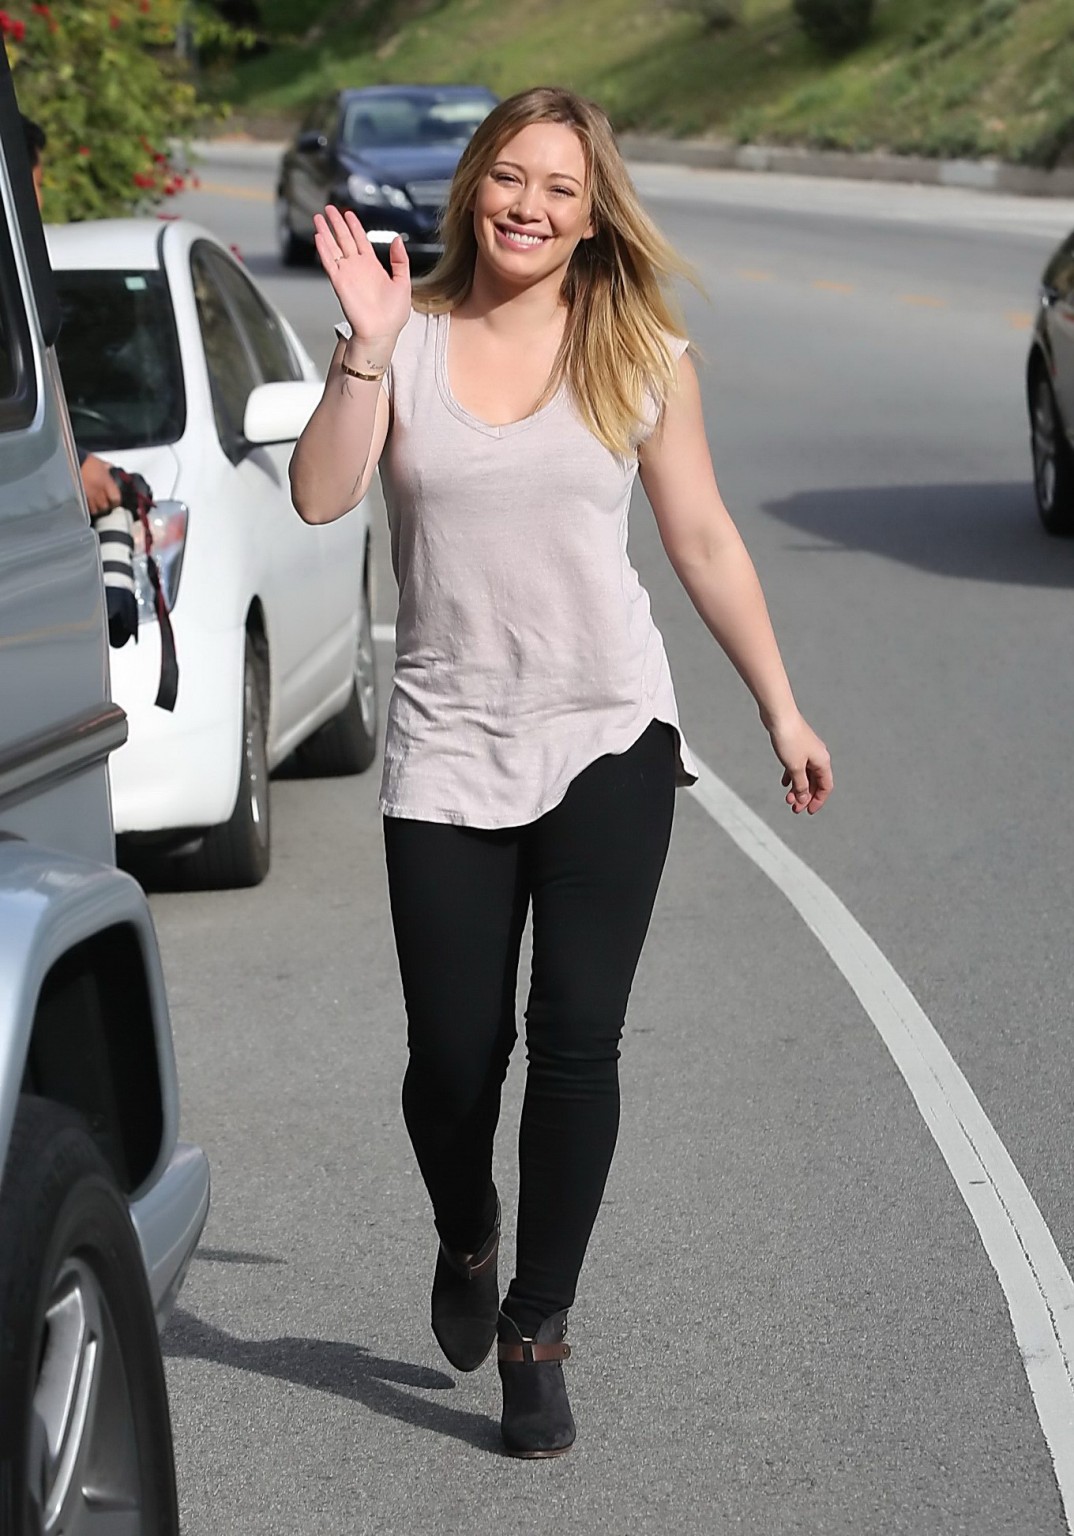 Hilary duff busty booty wearing top and tights out in beverly hills
 #75243021